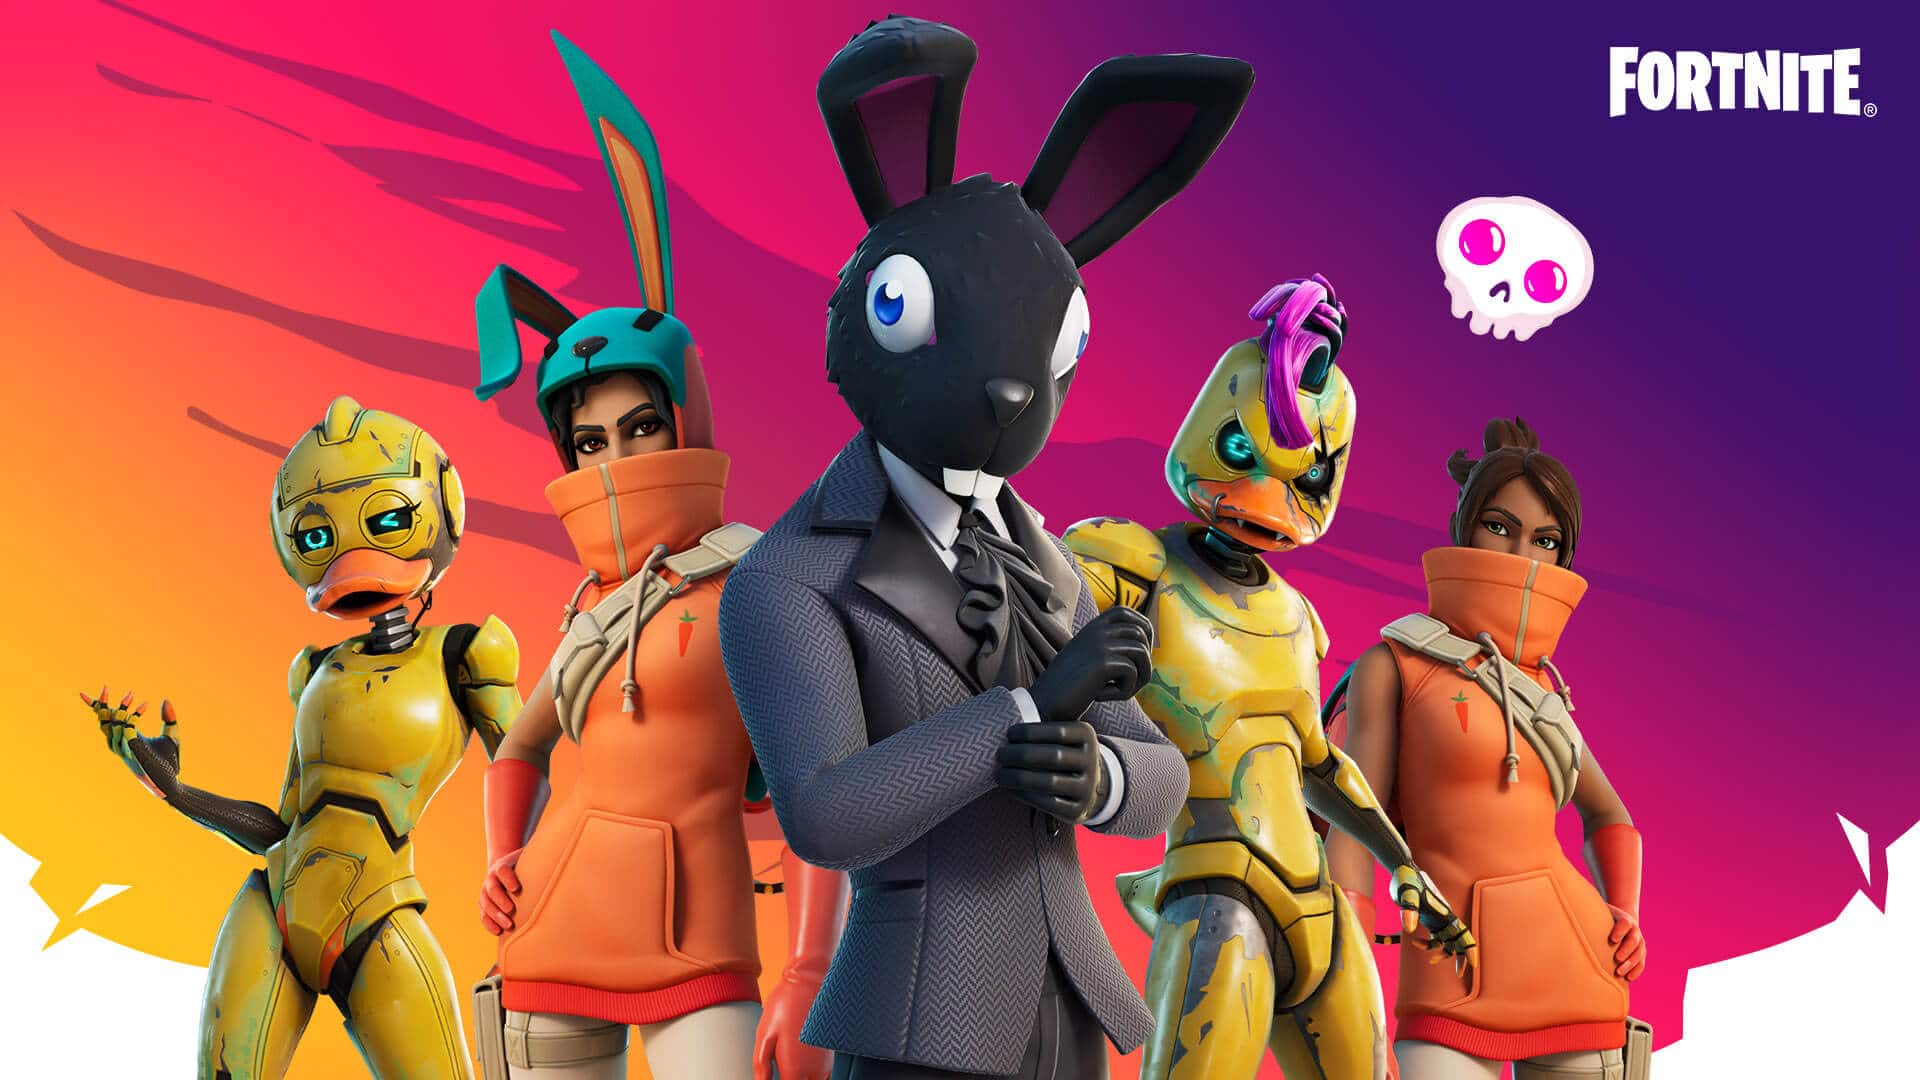 Fortnite 16.10 leaks - all the skins and other cosmetics